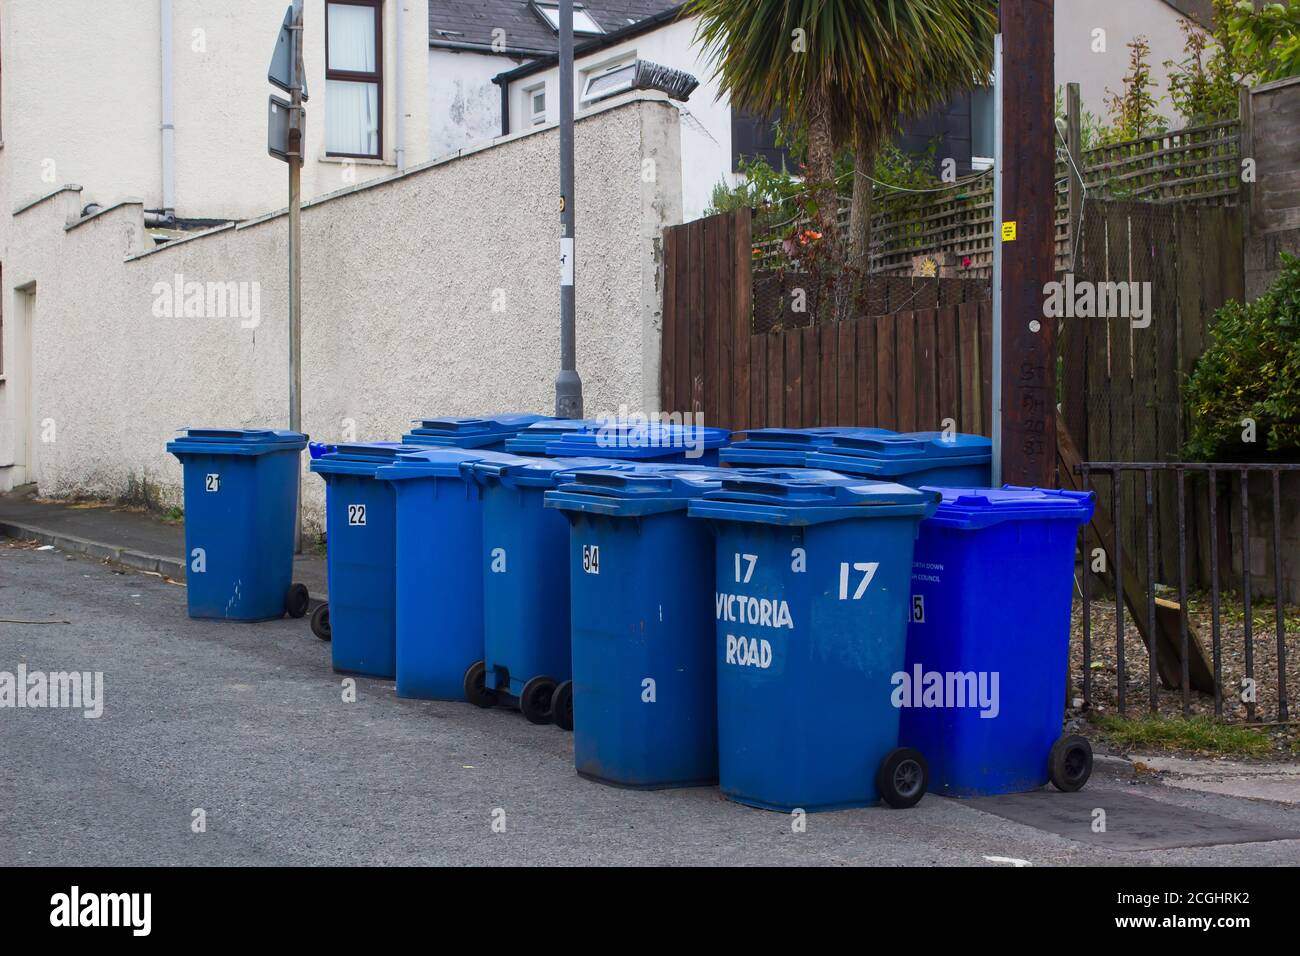 17 June 2020 A collection of Blue bins containing re-recyclable waste prepared for collection by the Northern Ireland Bangor Borough Council waste dispo Stock Photo